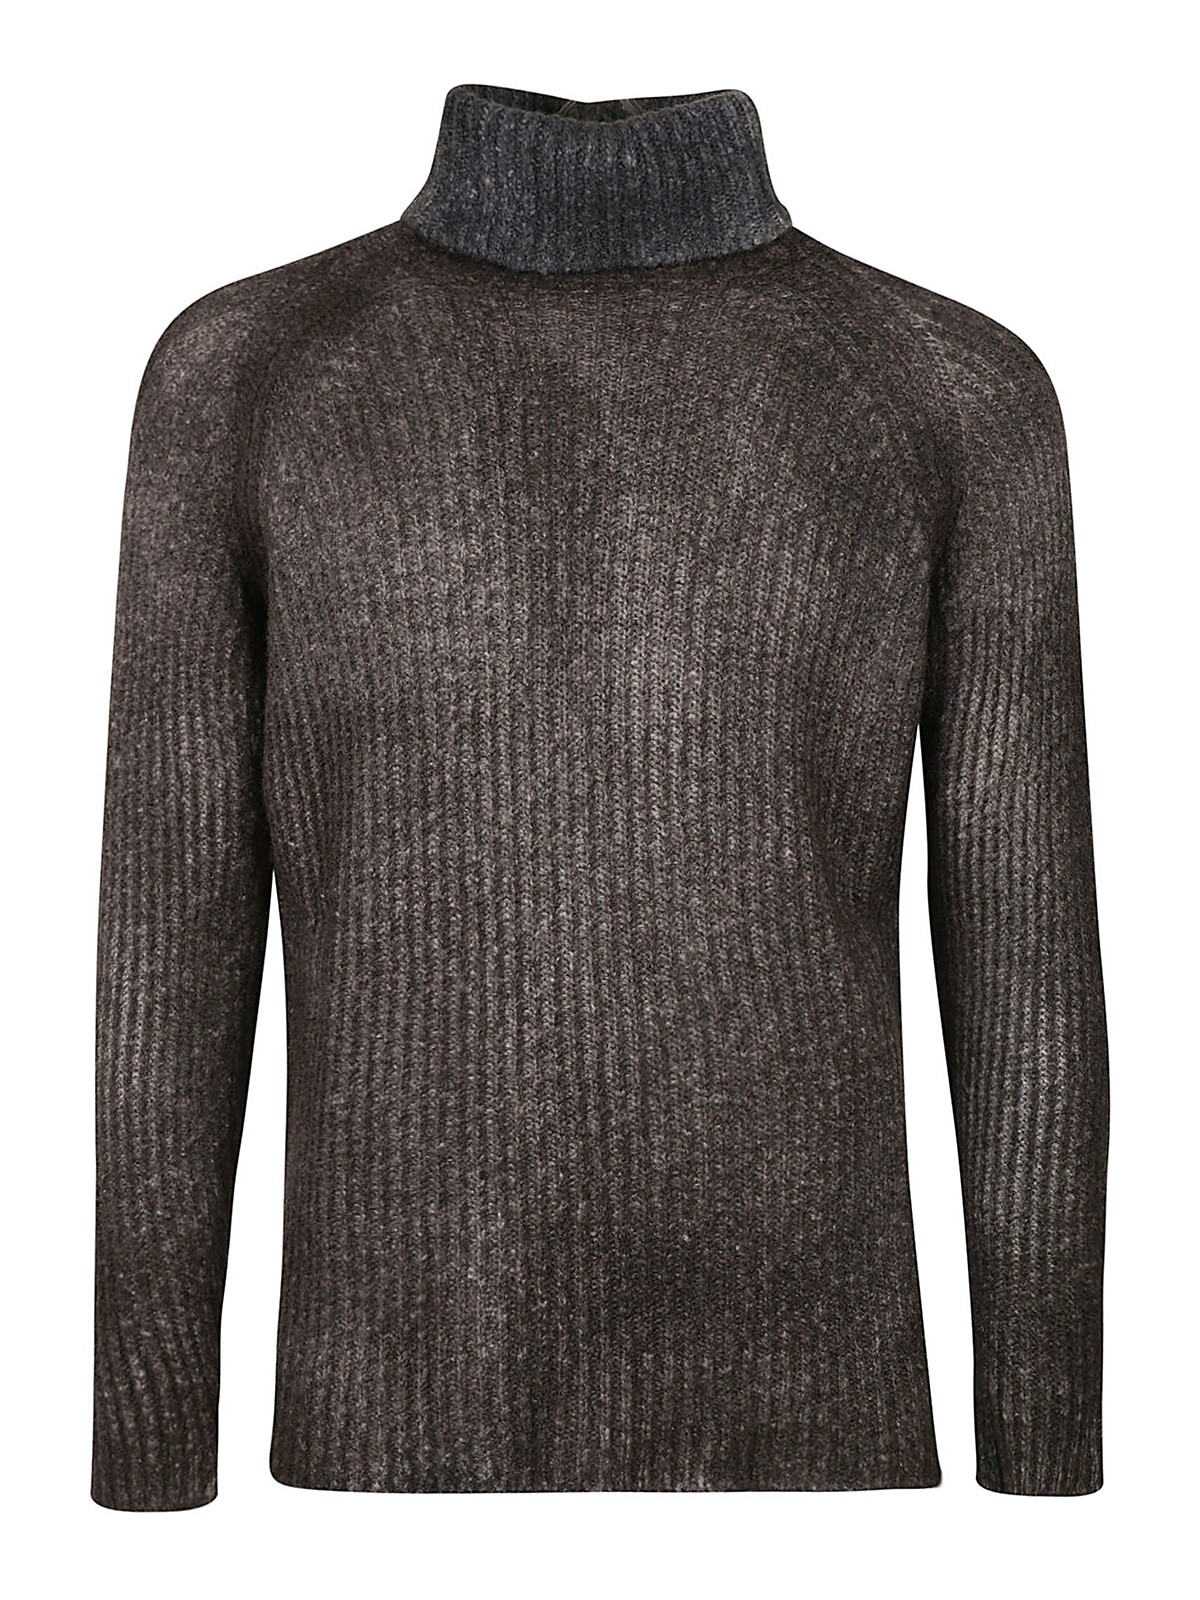 Avant Toi Ribbed Turtleneck Pullover In Marrón Oscuro